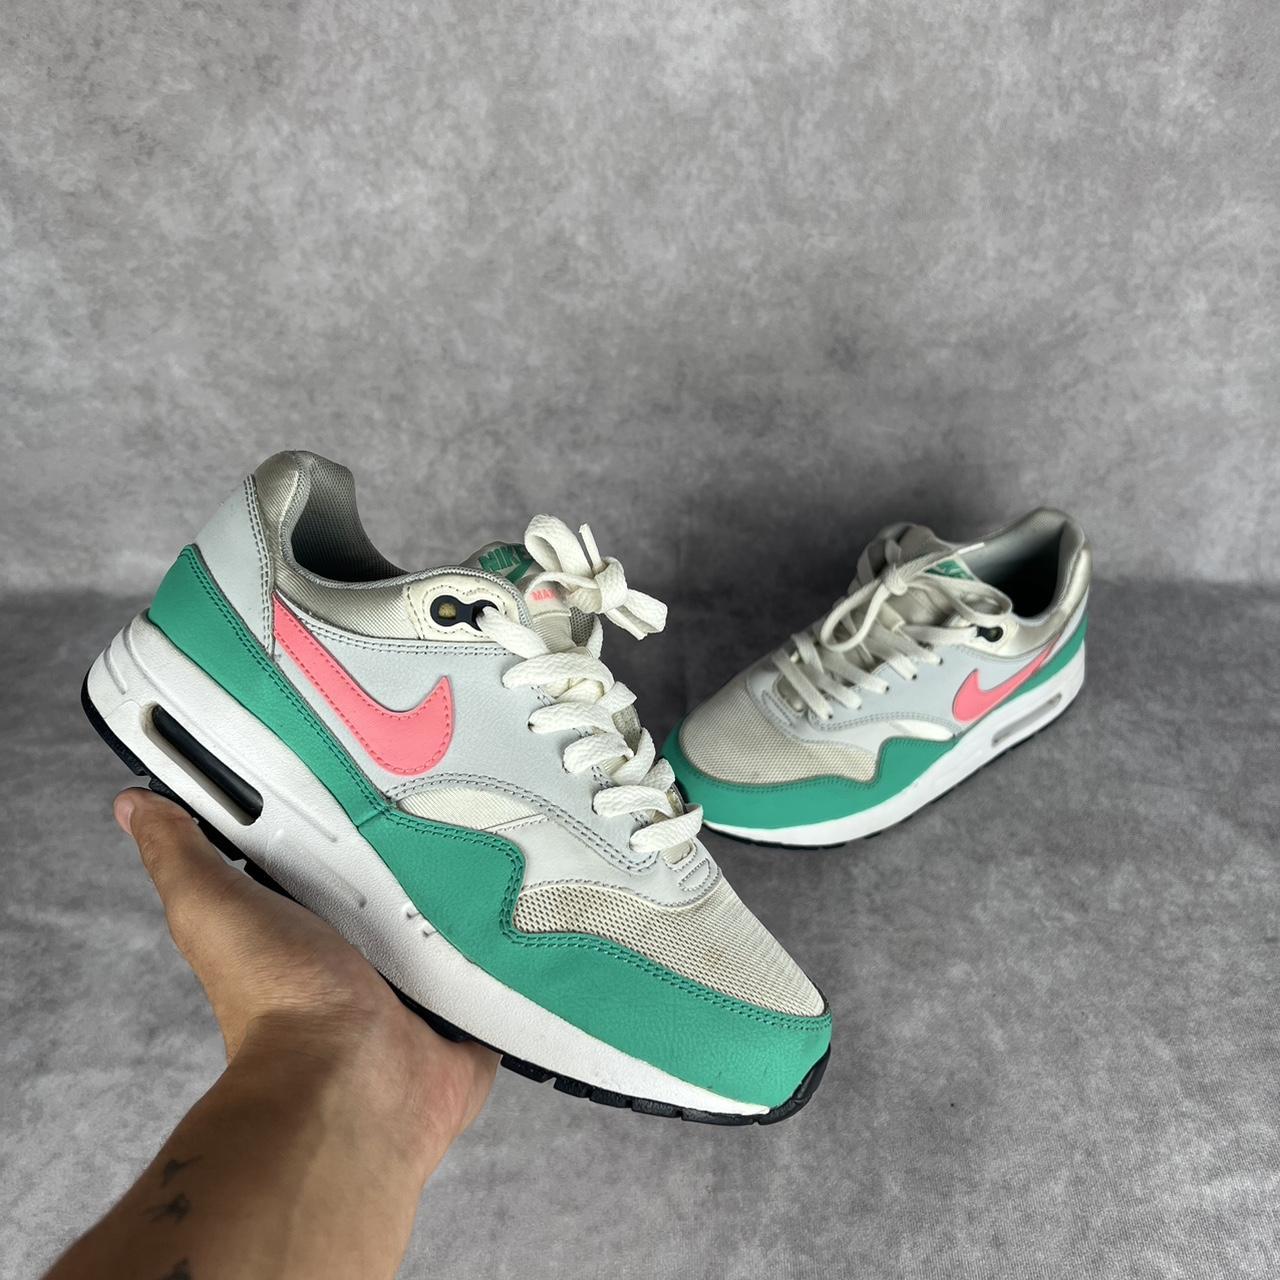 Proverbio Scully Puerto Nike Air Max 1 South Beach (GS) Watermelon Colorway... - Depop